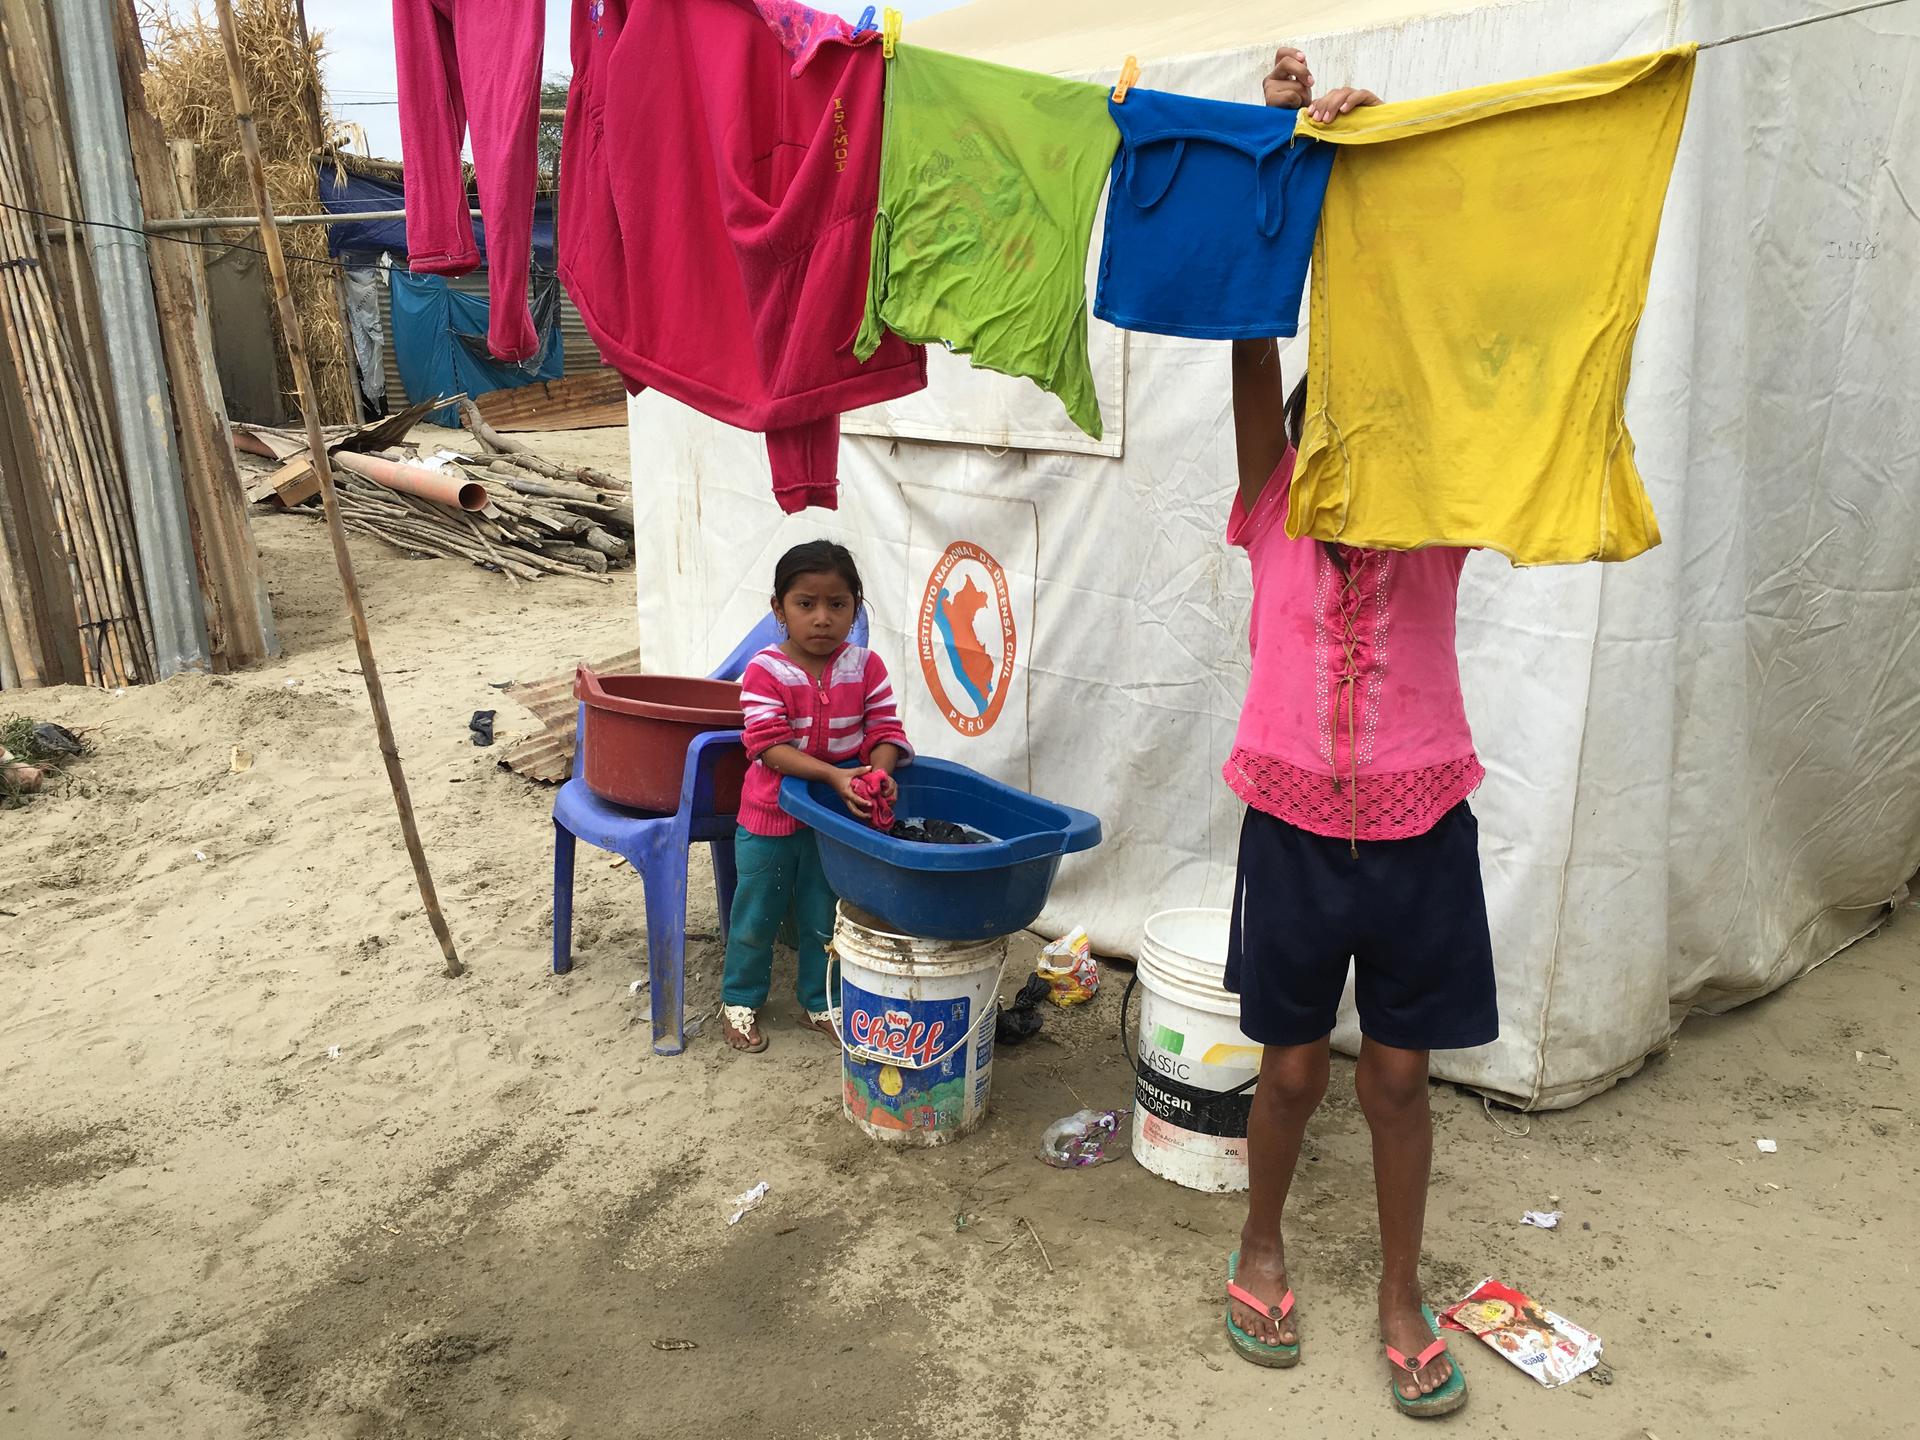 Children hang clothes to dry outside their tent on a clothsline in the village of Pedregal Chico.